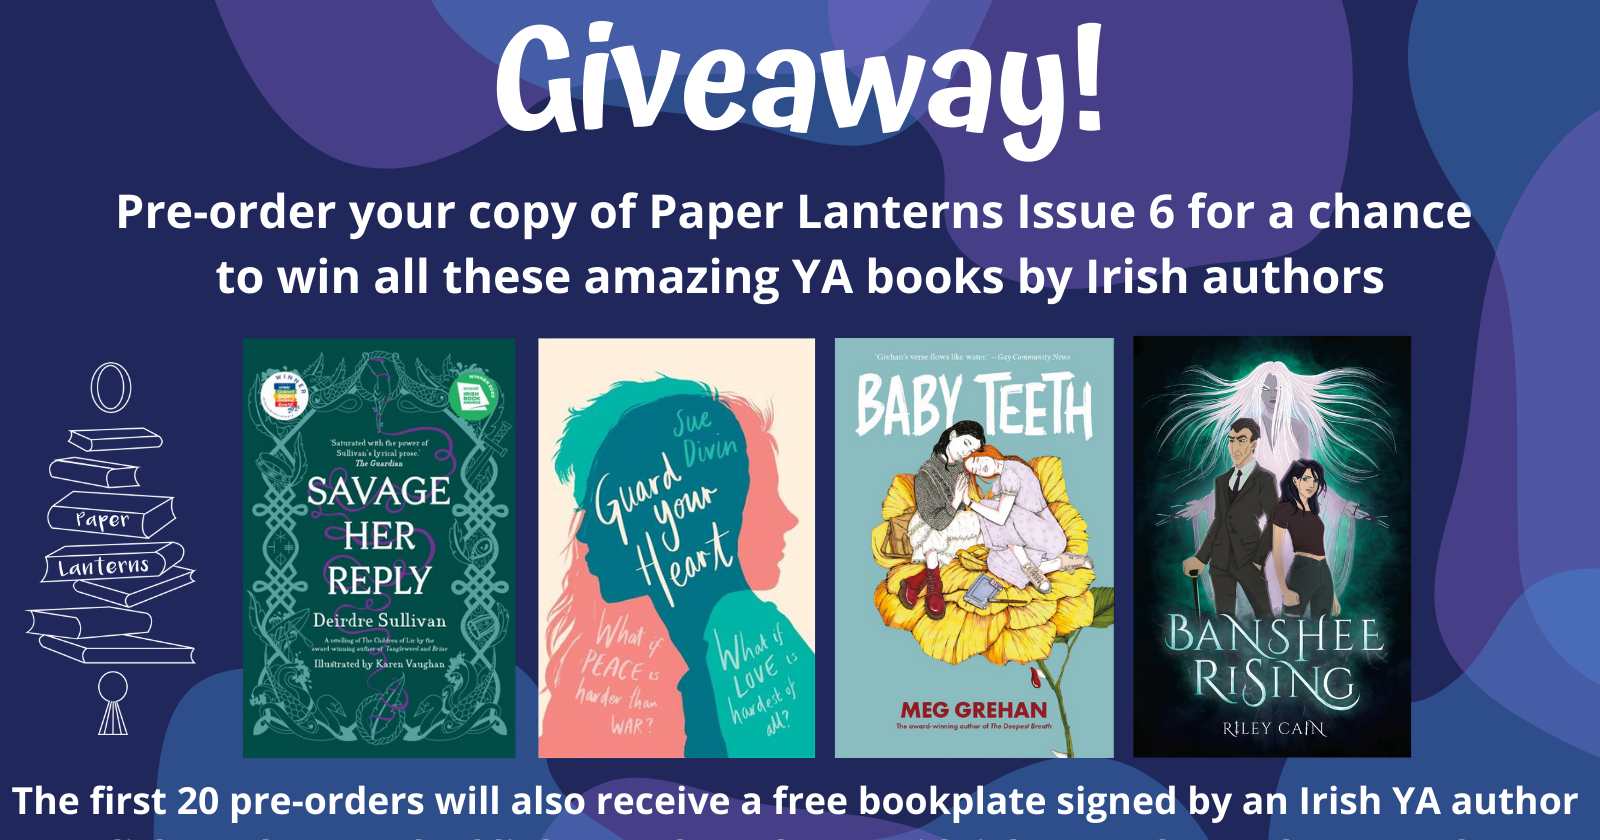 Paper Lanterns Issue 6 giveaway